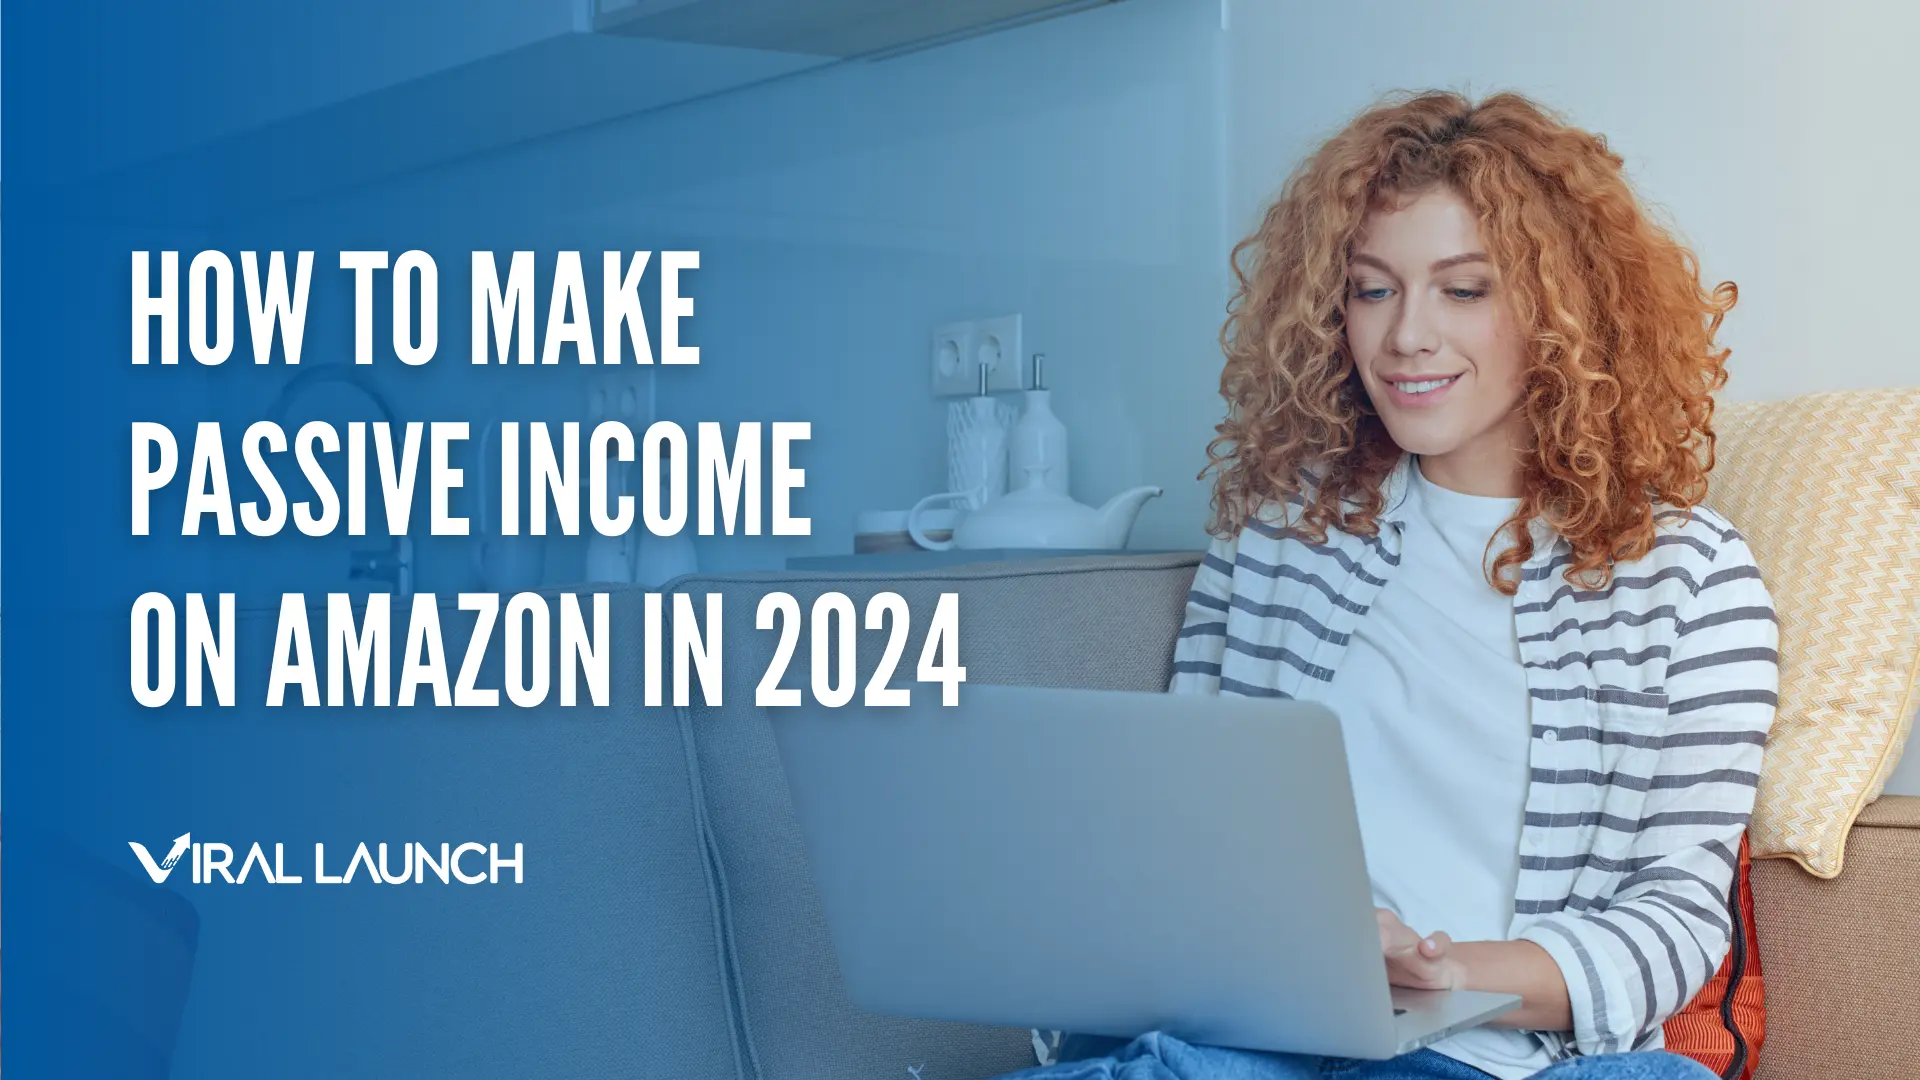 6 Different Ways on How to Make Passive Income on Amazon in 2024